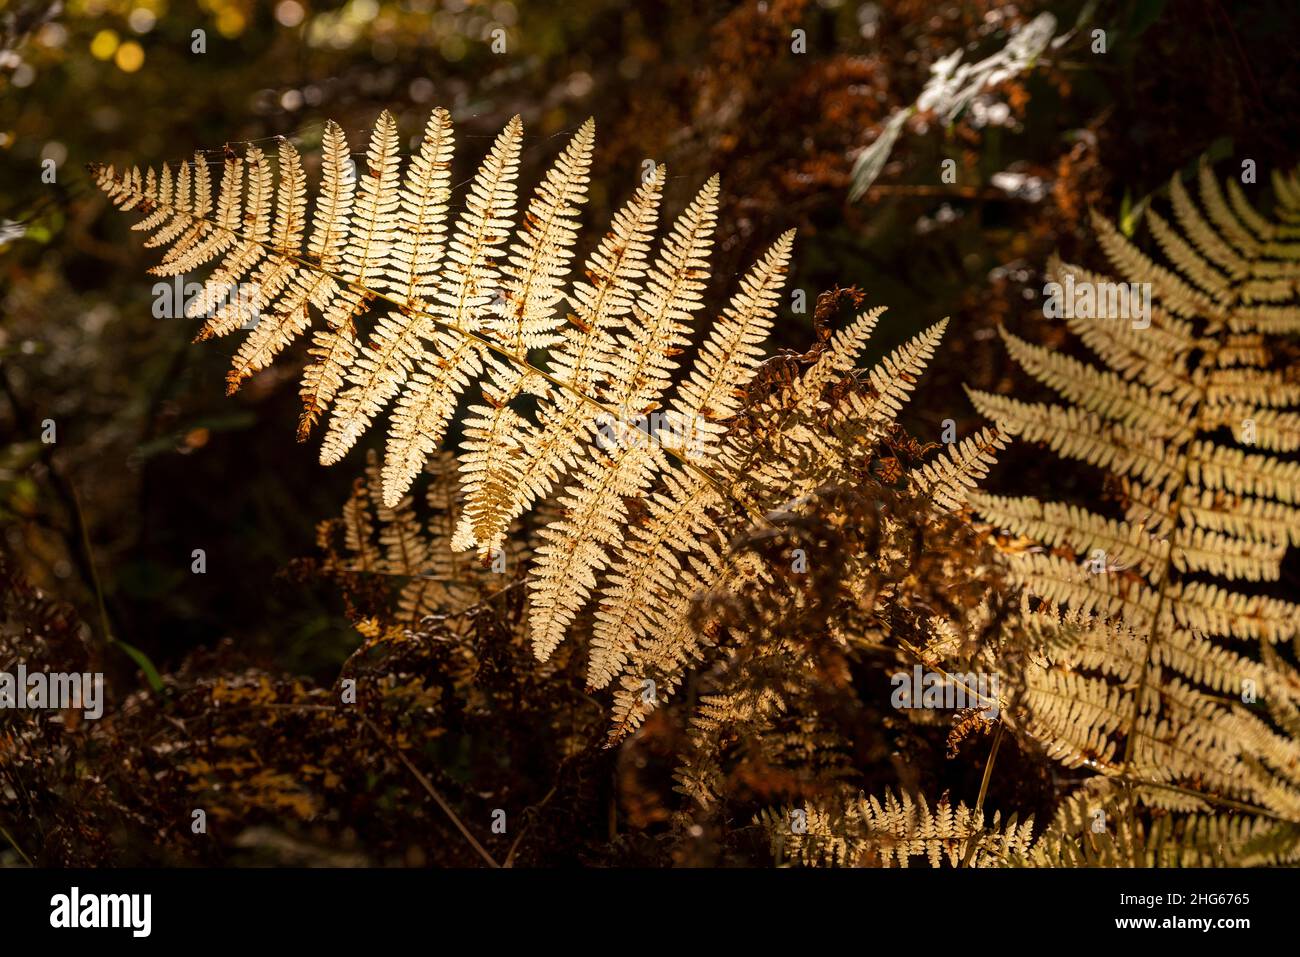 Close-up of a dried brown frond of common lady fern (Athyrium filix-femina) in back light in an autumn forest, Reinhardswald, Germany Stock Photo